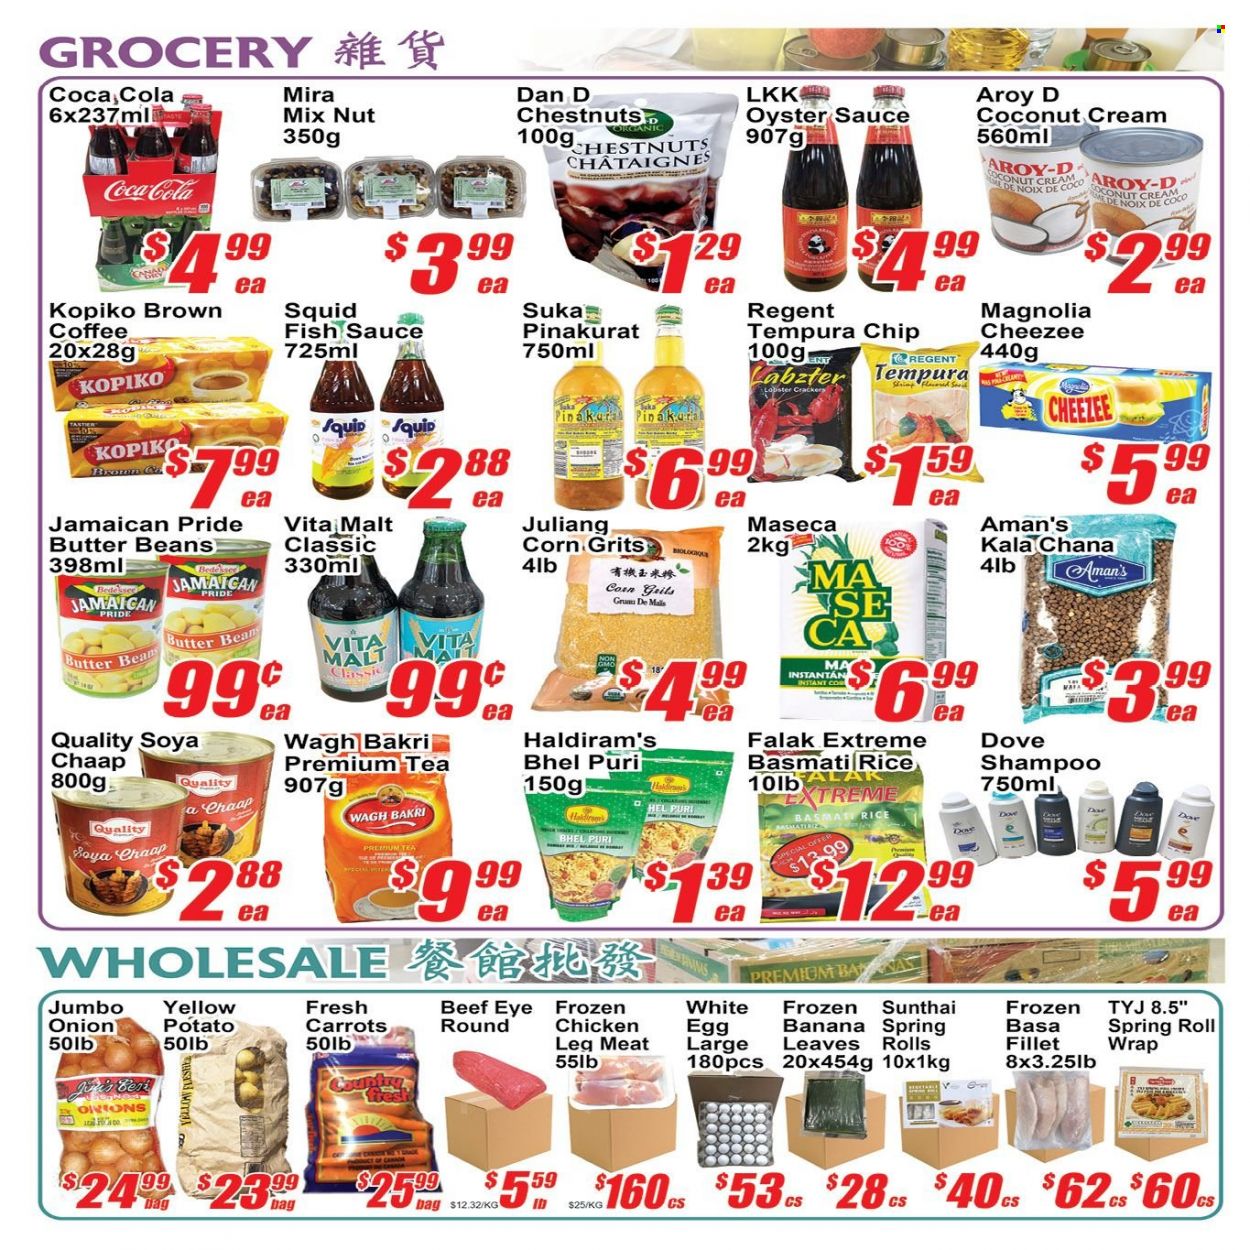 thumbnail - Jian Hing Supermarket Flyer - March 17, 2023 - March 23, 2023 - Sales products - carrots, corn, onion, bananas, lobster, squid, oysters, fish, sauce, eggs, Dove, crackers, grits, malt, basmati rice, rice, fish sauce, oyster sauce, chestnuts, Coca-Cola, tea, coffee, chicken legs, beef meat, eye of round. Page 2.